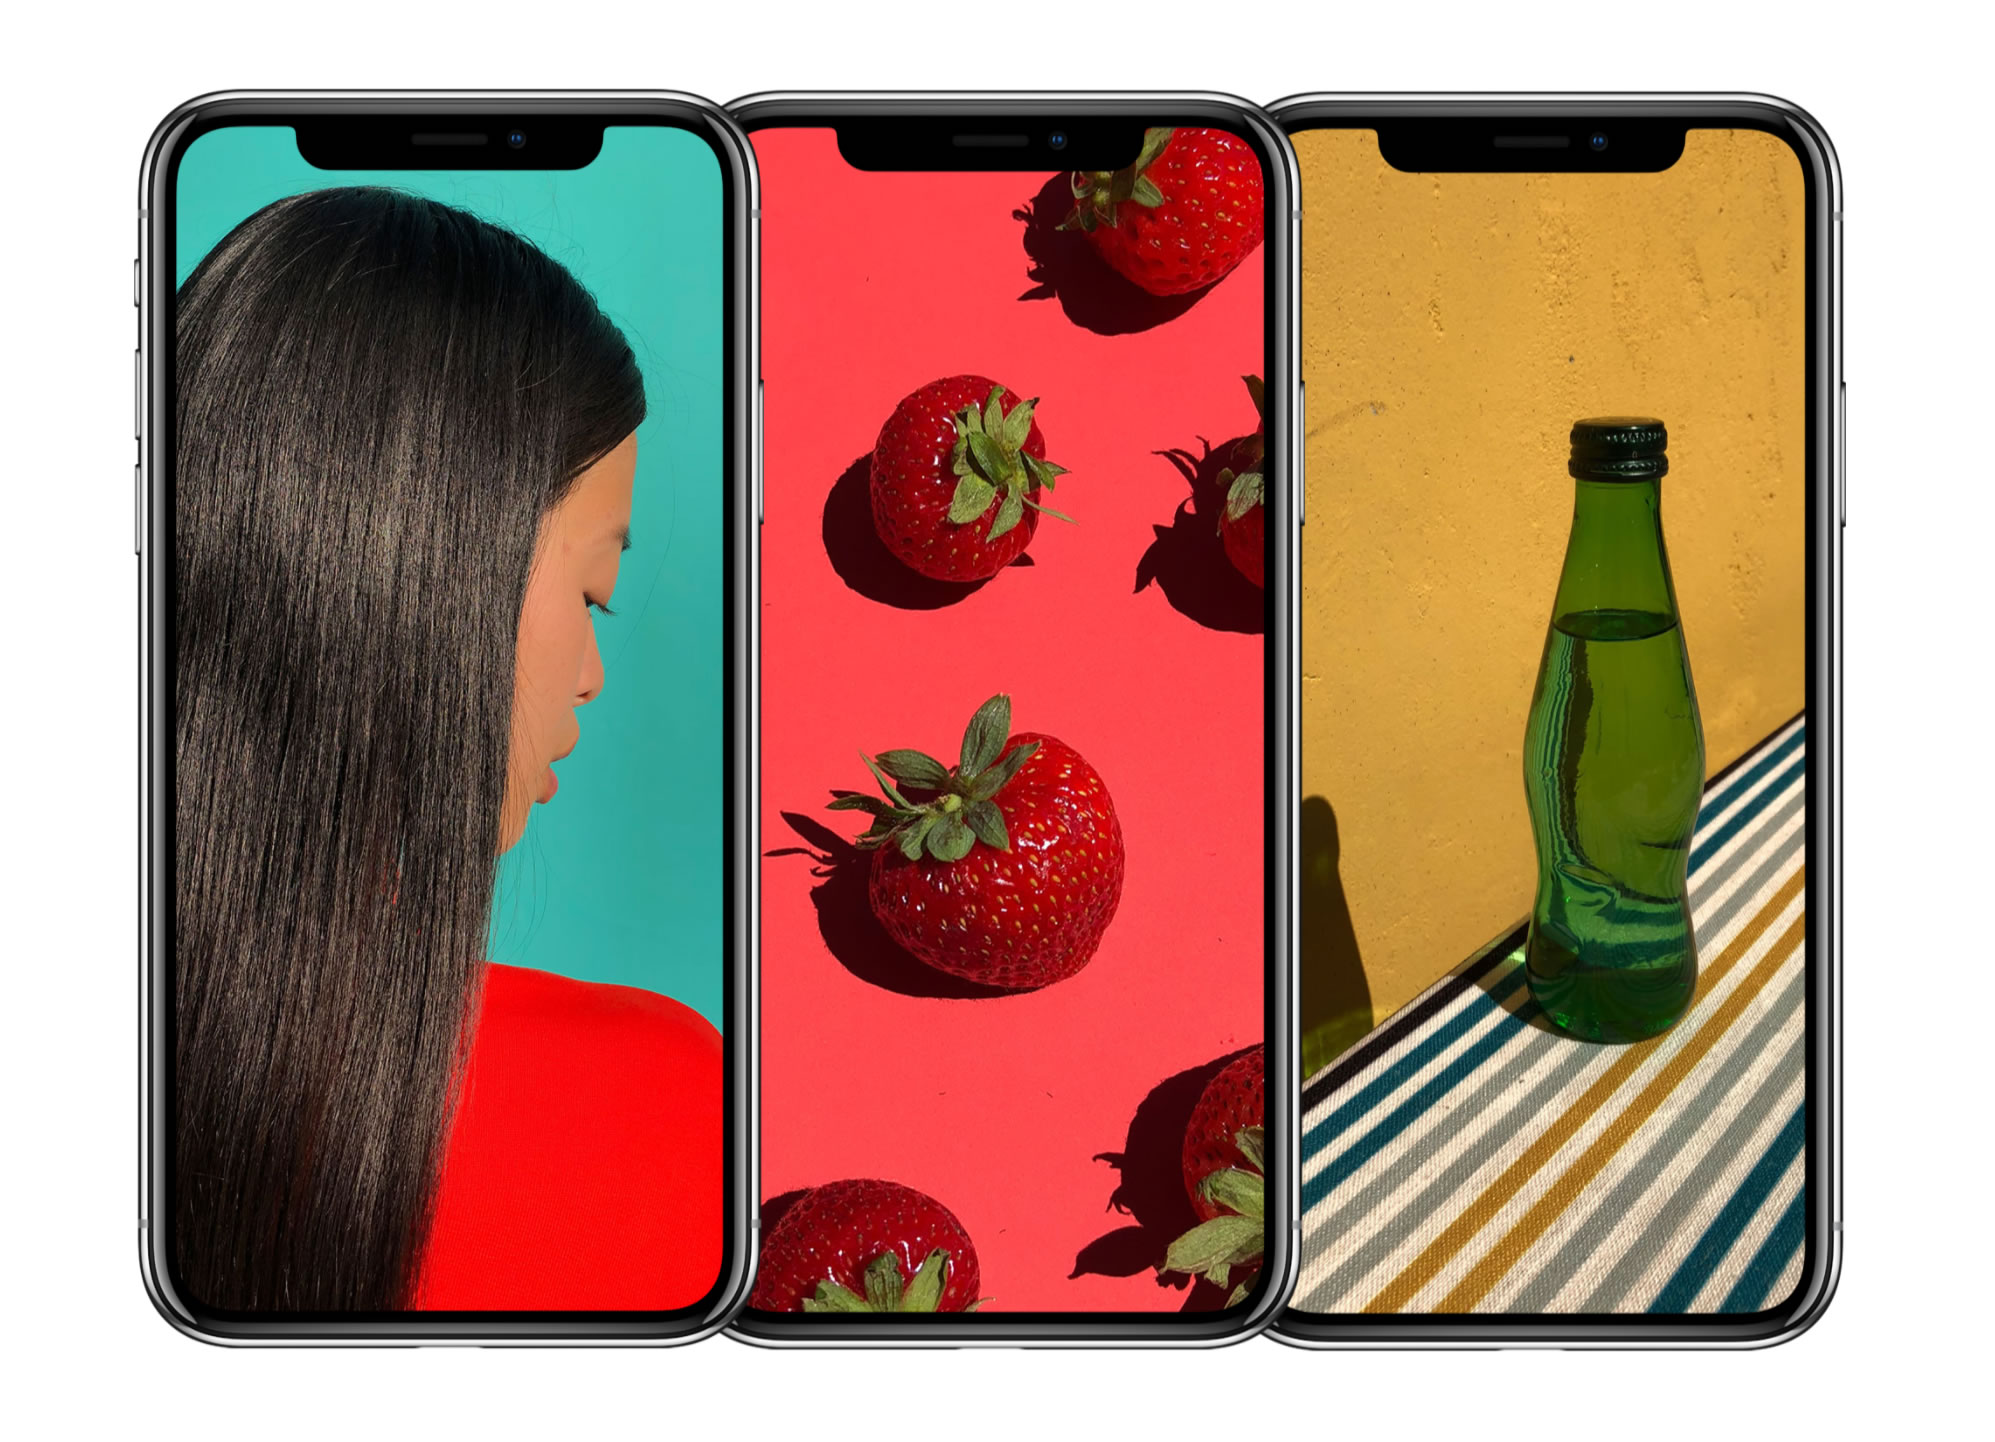 Apple unveils iPhone X, its most expensive smartphone ever